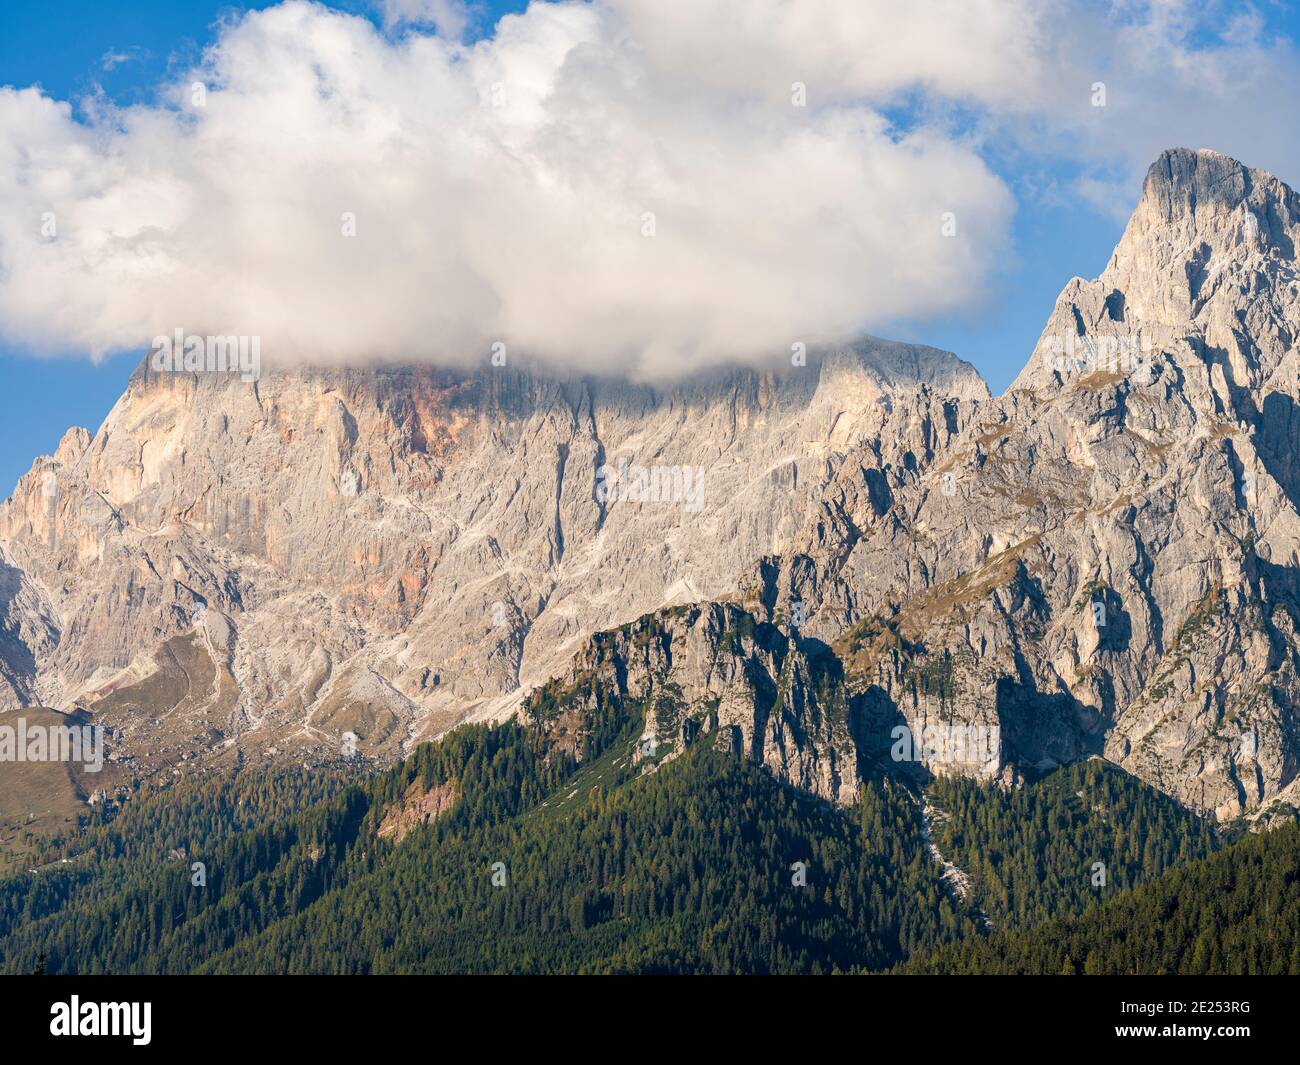 Val Cismon and the  Pale di San Martino, part of UNESCO world heritage Dolomites, in the dolomites of the Primiero.  Europe, Central Europe, Italy Stock Photo